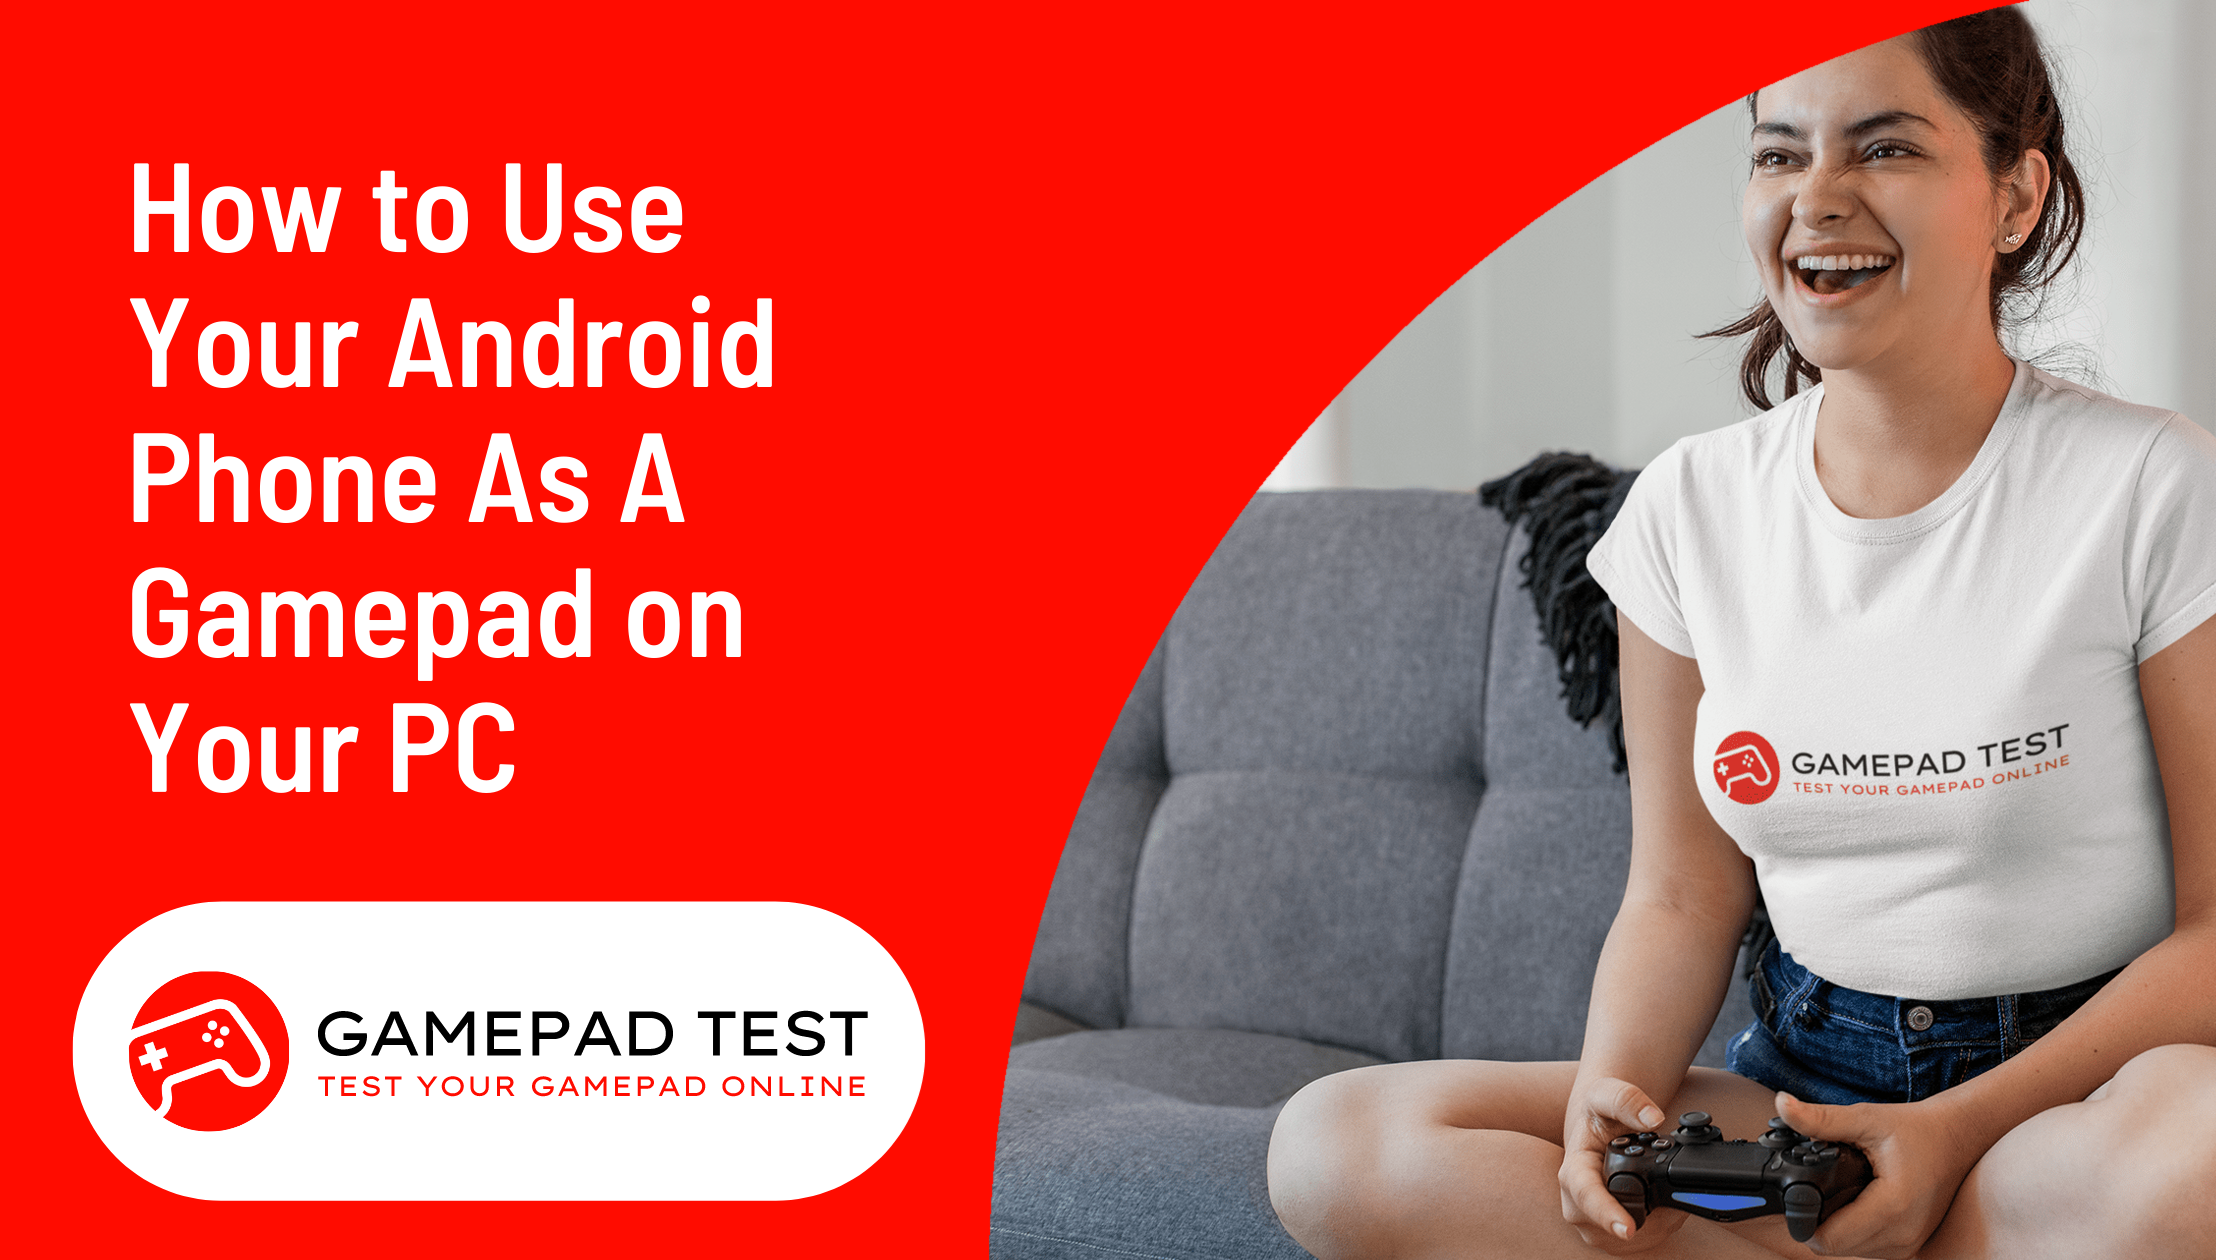 How to Use Your Android Phone As A Gamepad on Your PC